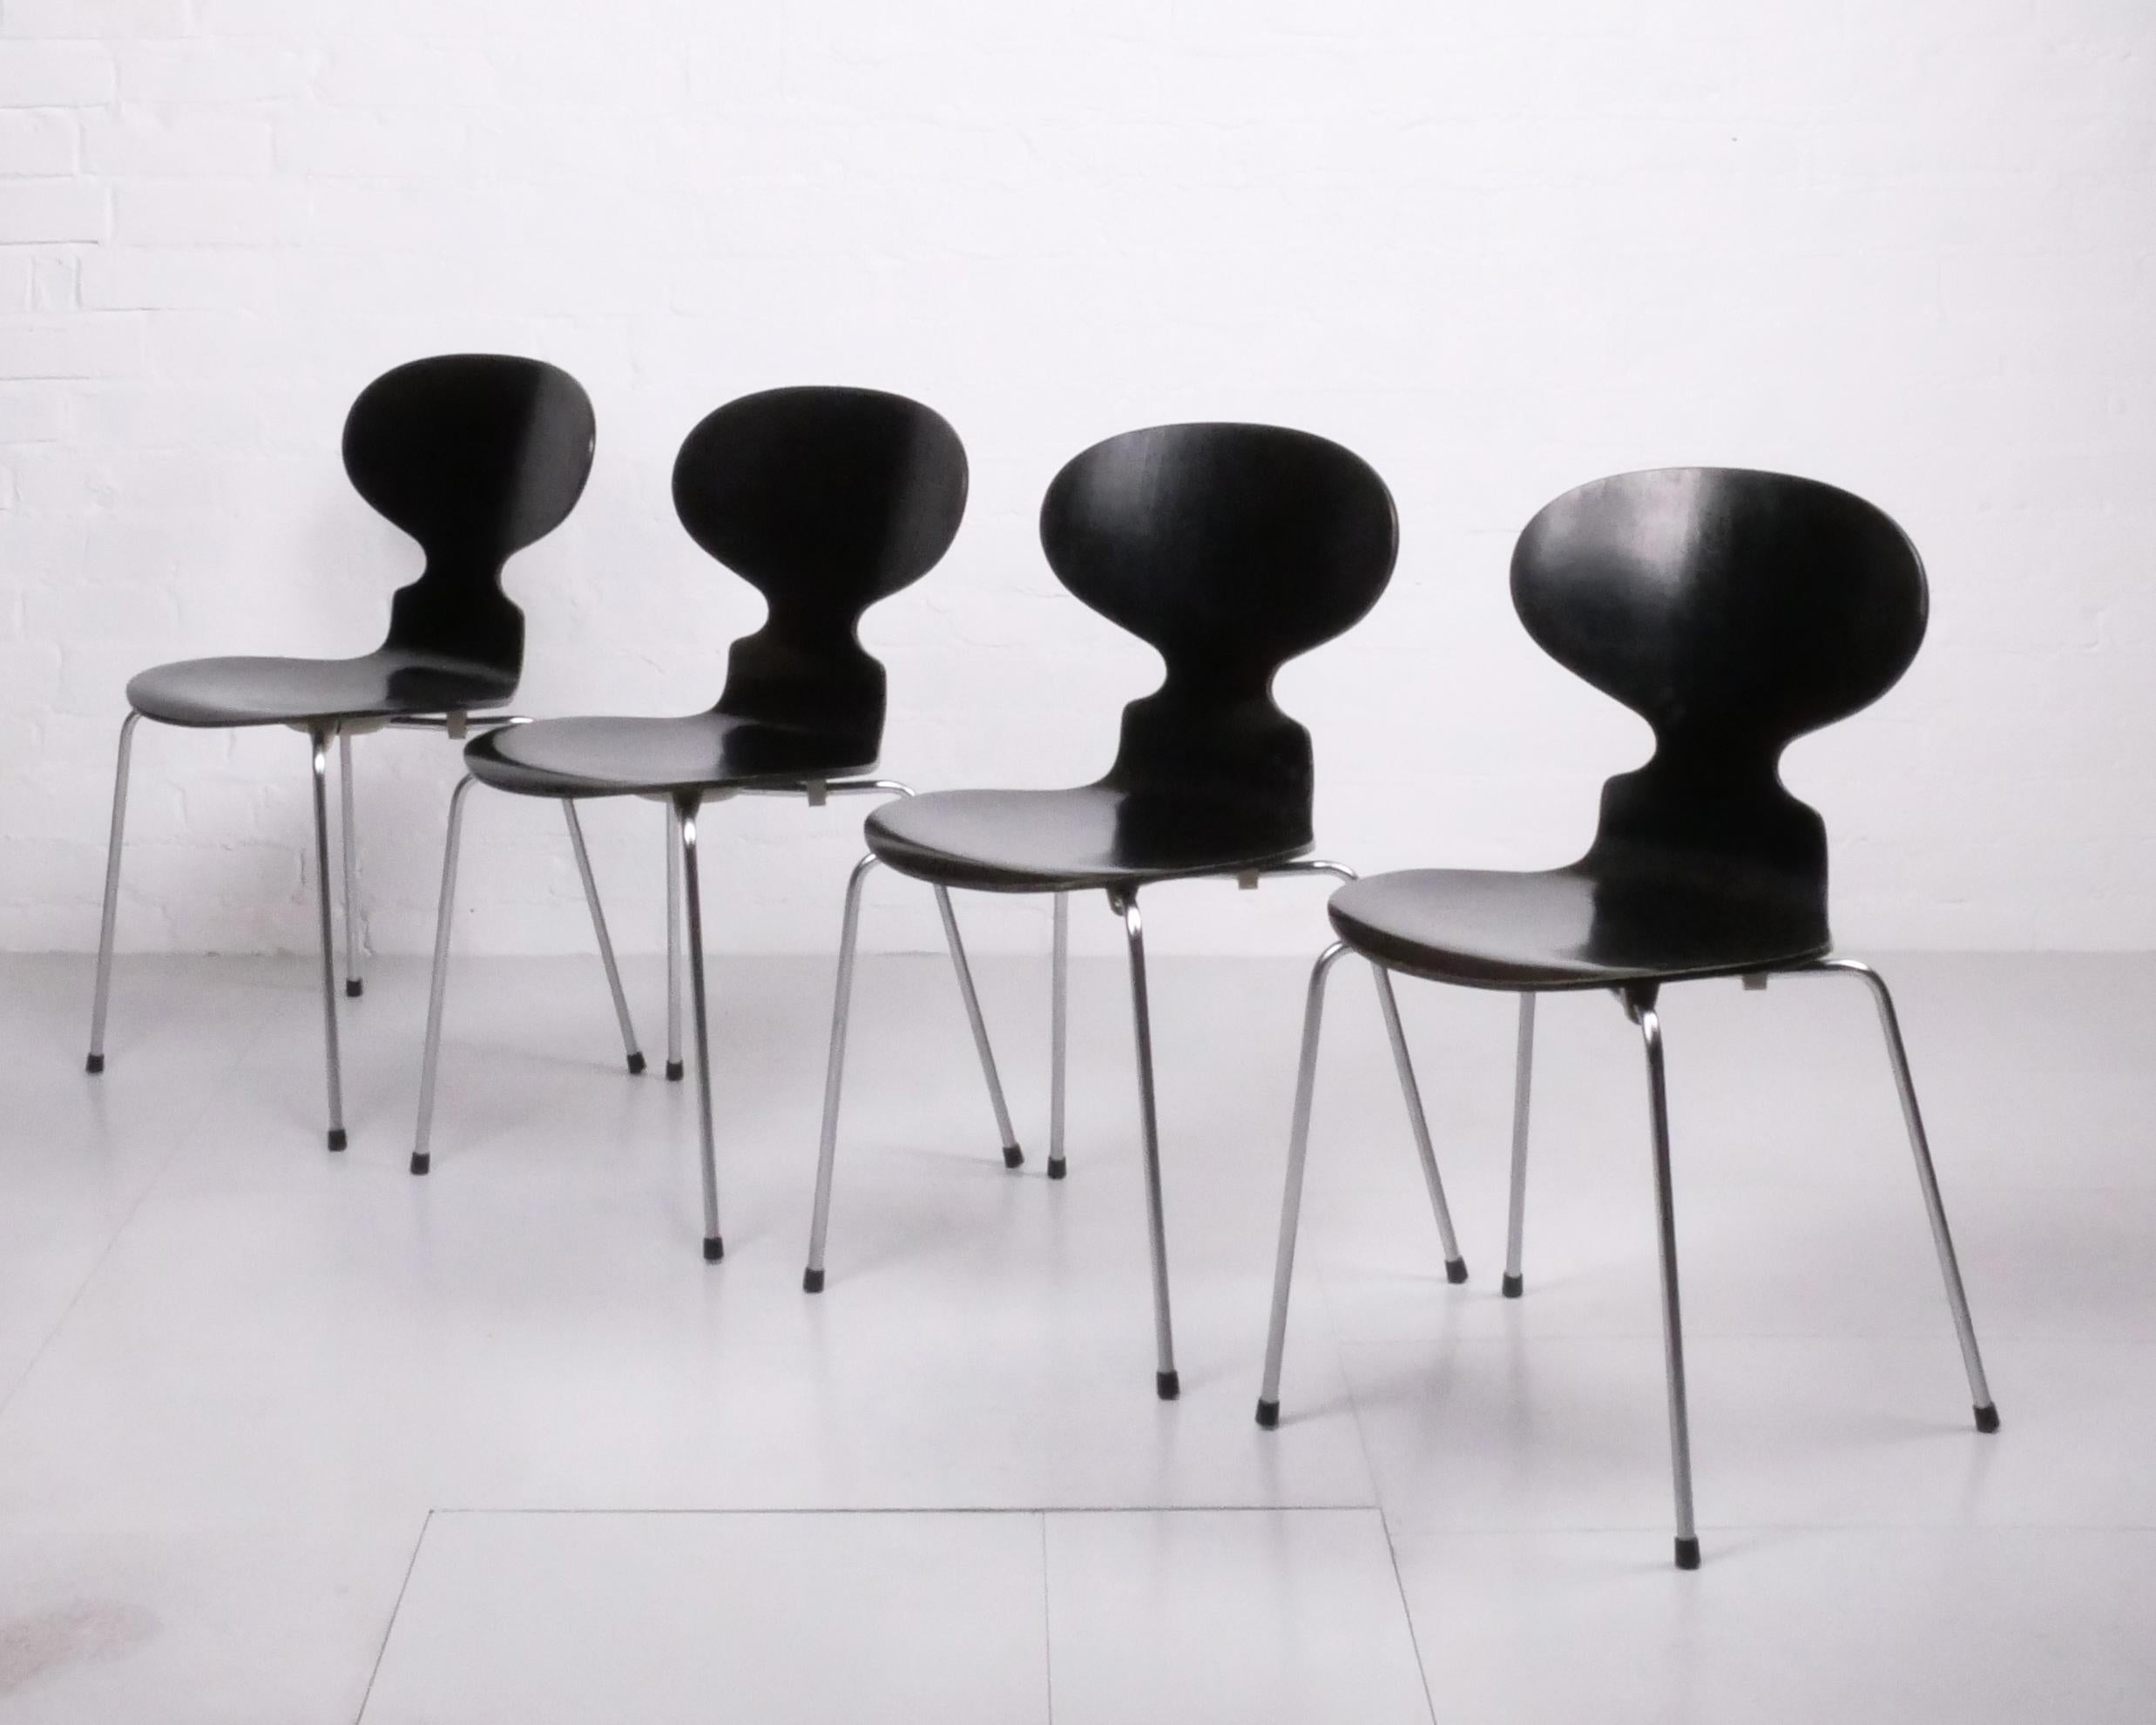 Danish Set of 4 ‘Ant’ Chairs by Arne Jacobsen for Fritz Hansen, 2 early sets available